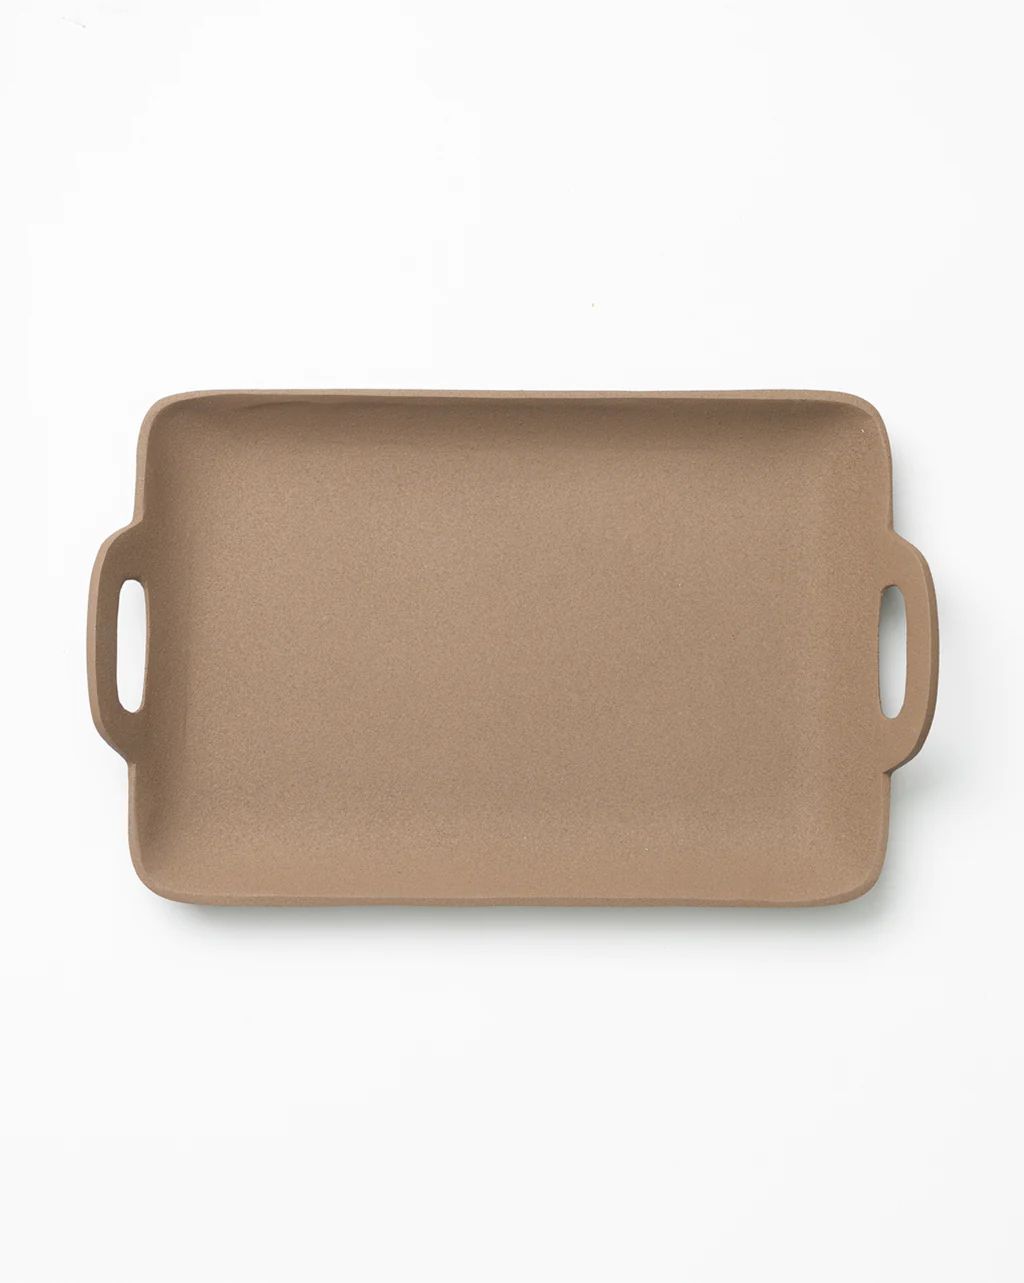 Textured Tray | McGee & Co.